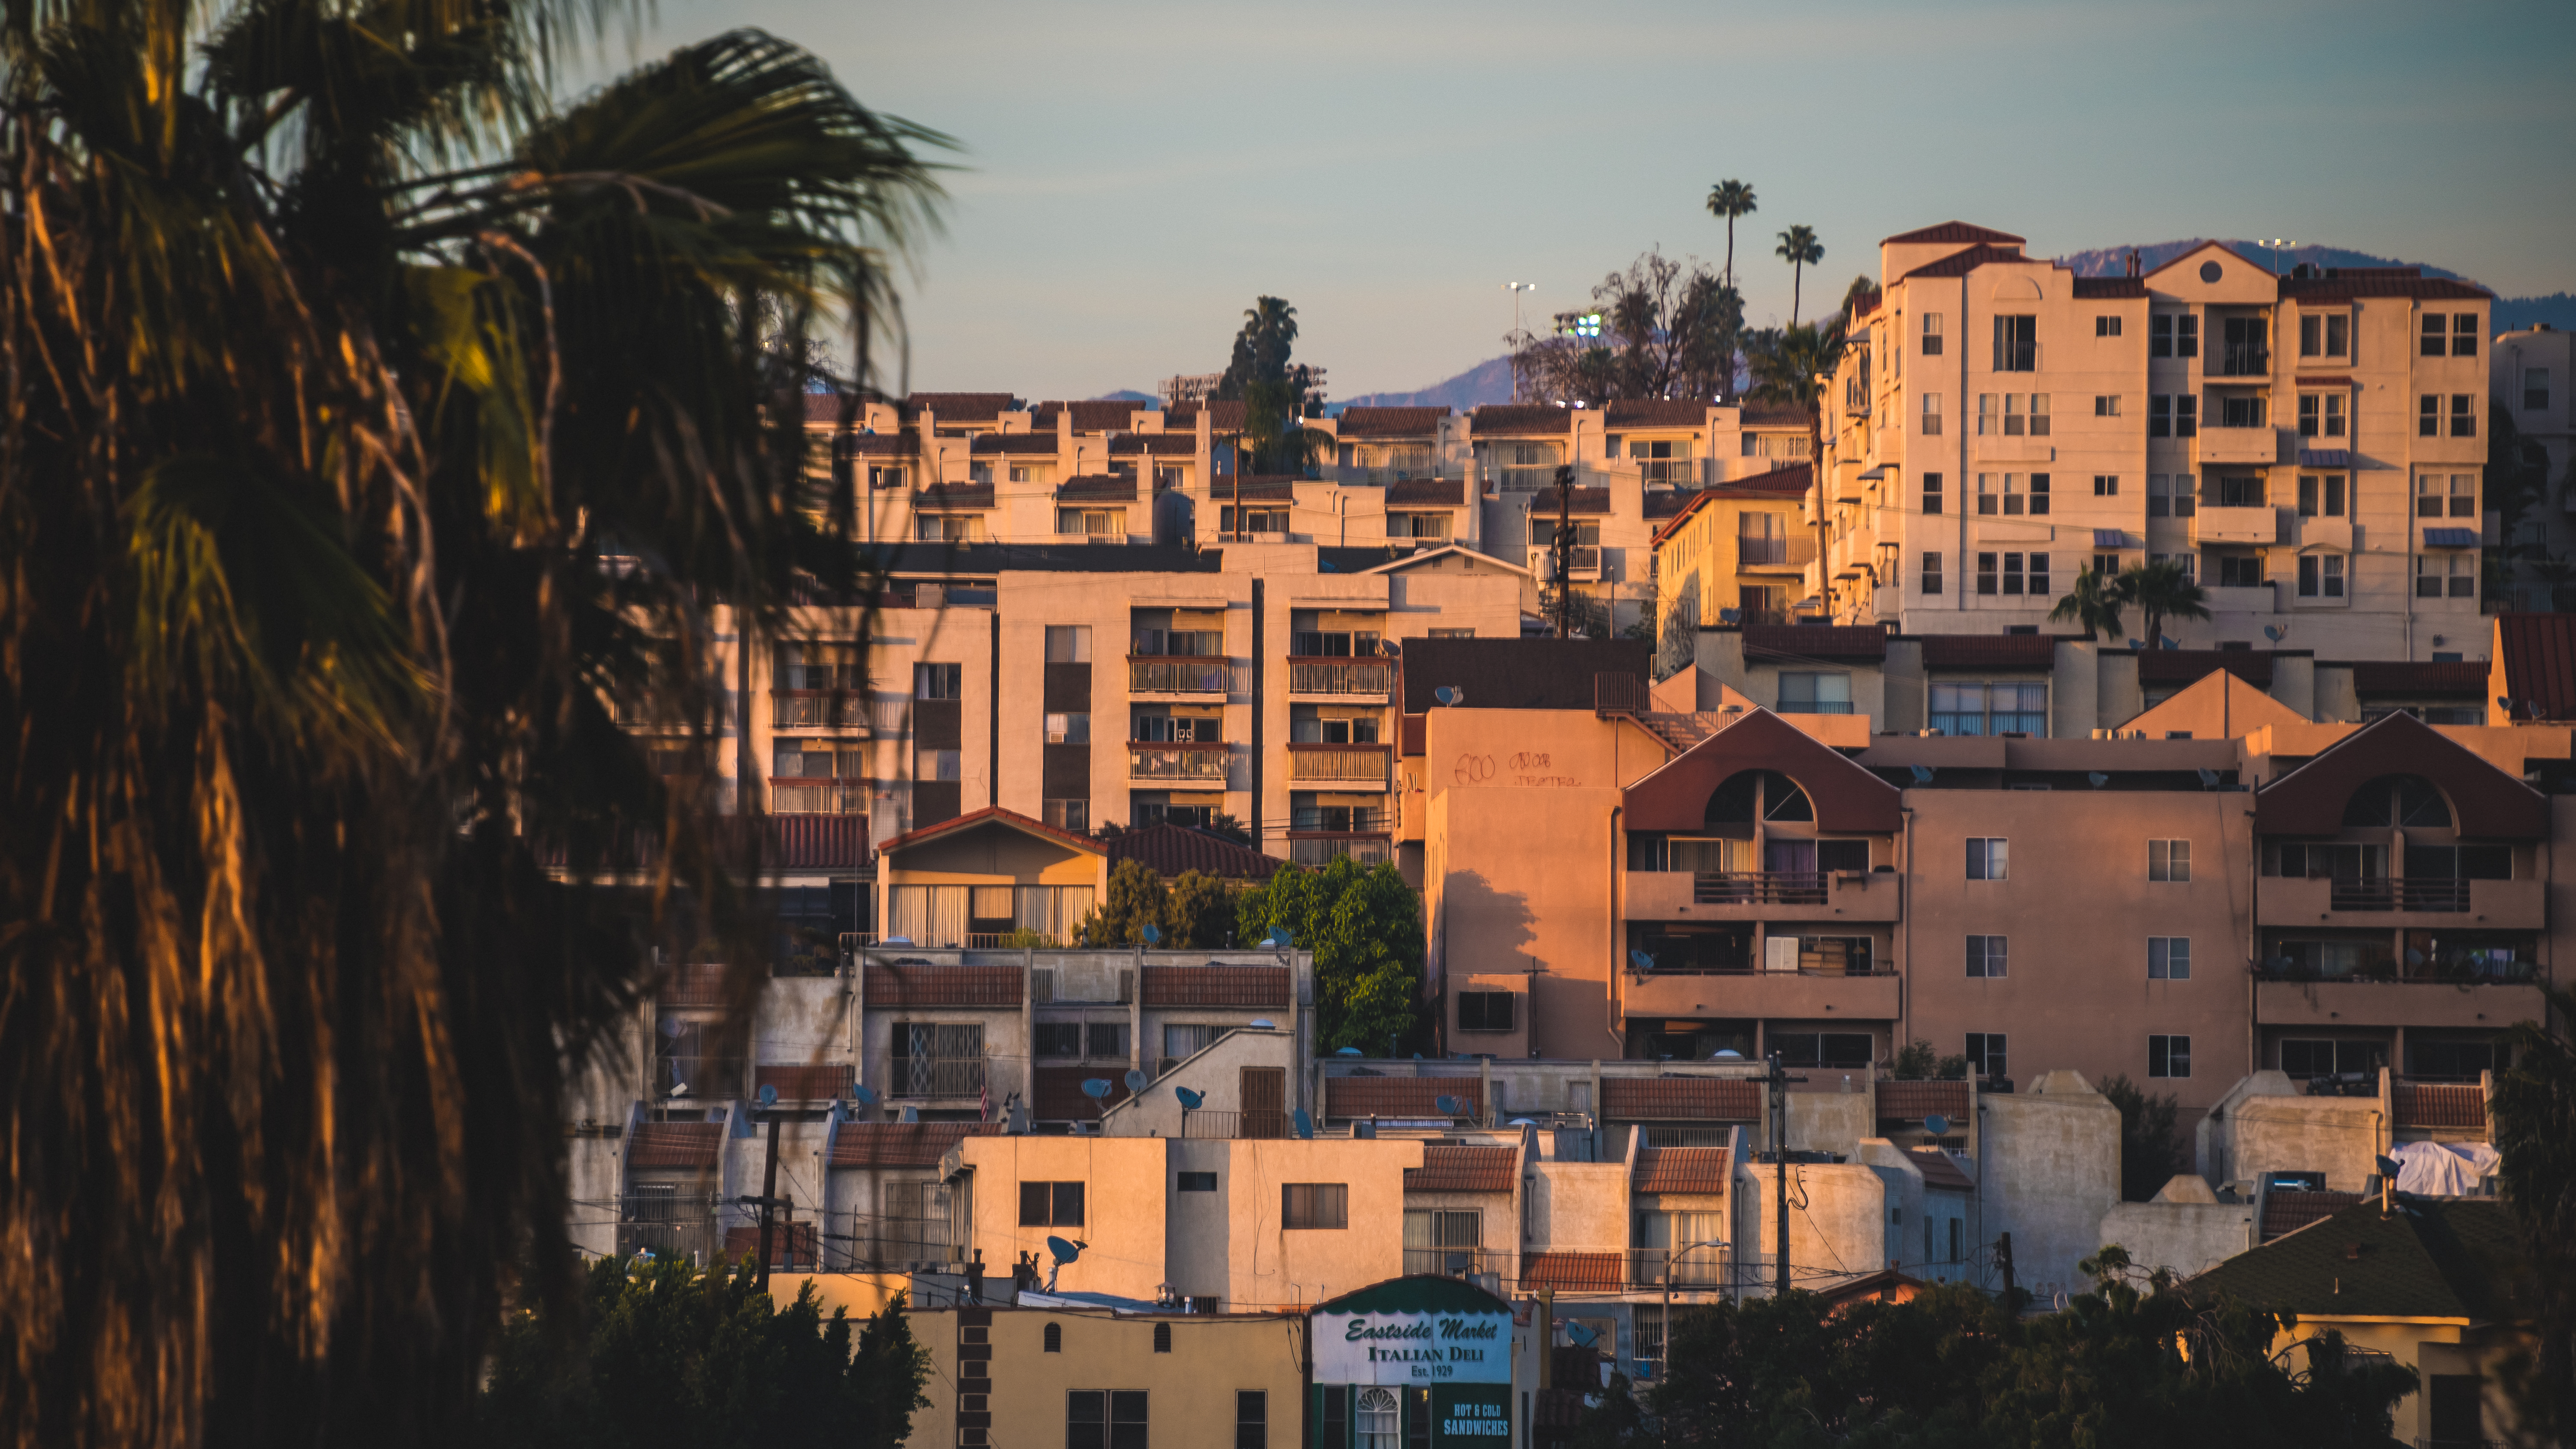 A cluster of dense white and beige apartments on a hillside at sunset.